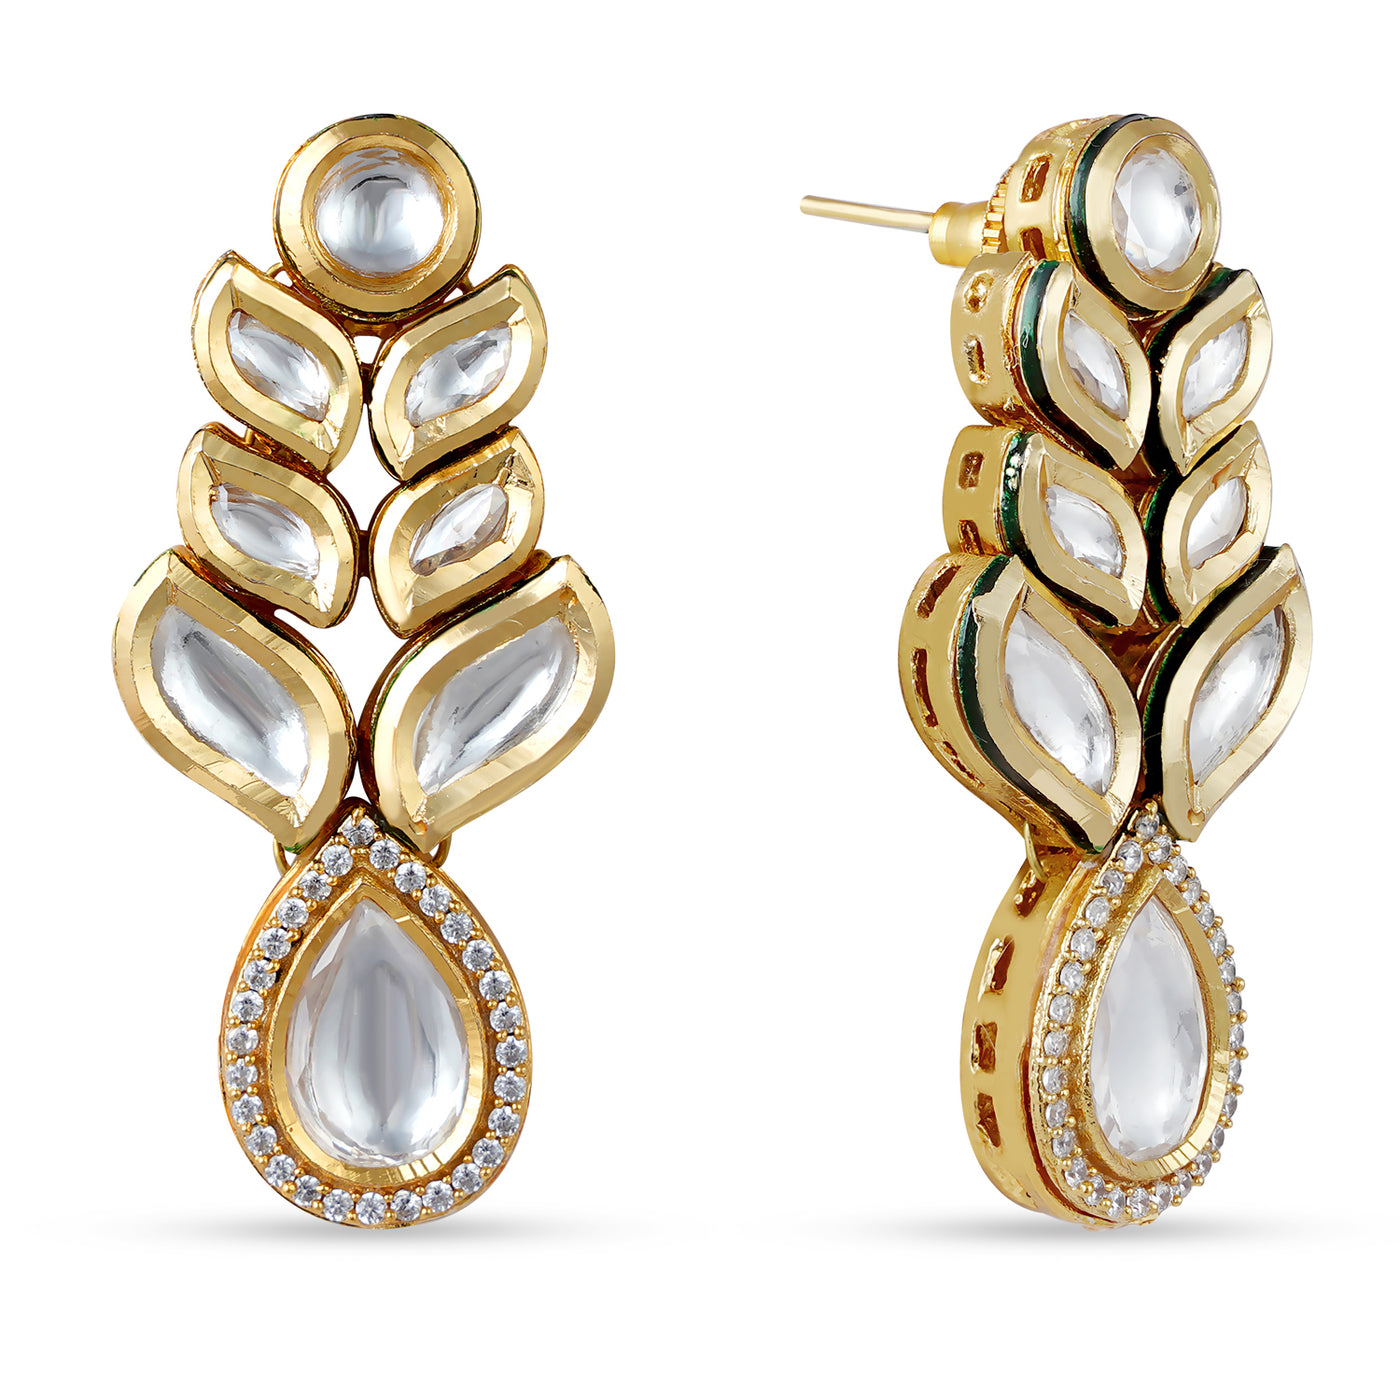 Classic Leaf Shaped Kundan Earrings. Front View and side view.